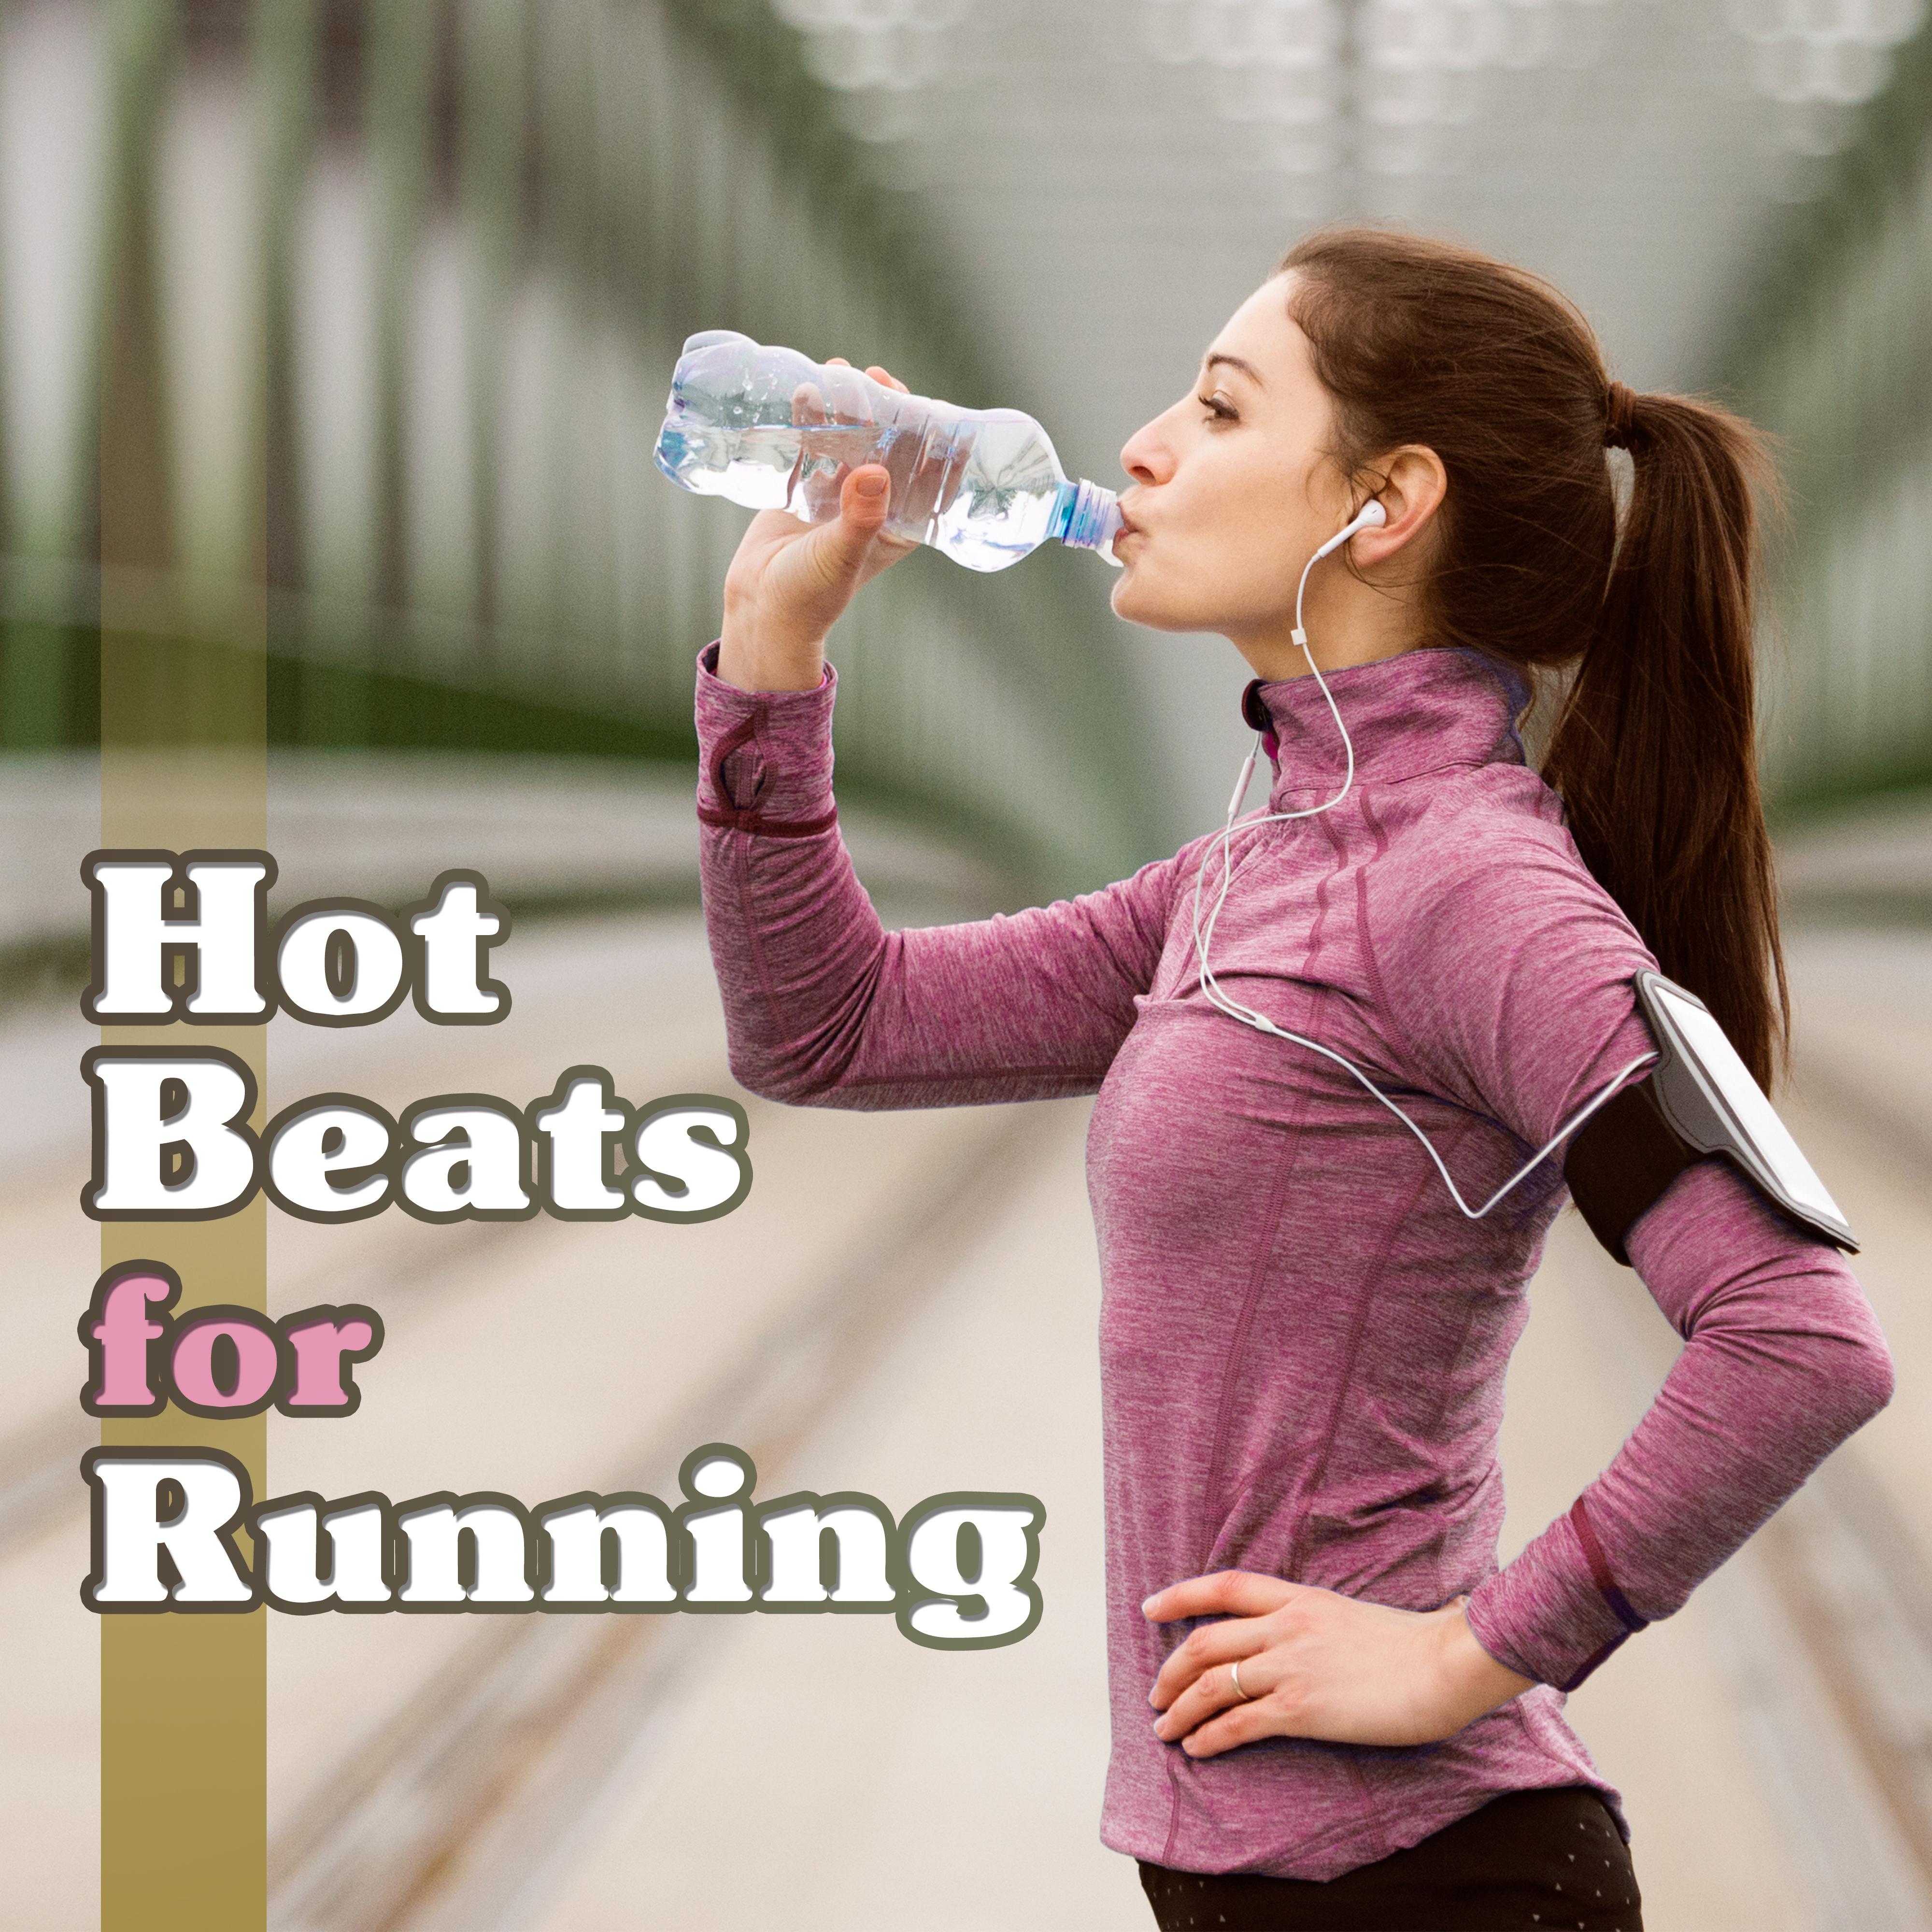 Hot Beats for Running – New Chill Out Hits for Running, Workout, Dance, Electronic Beats